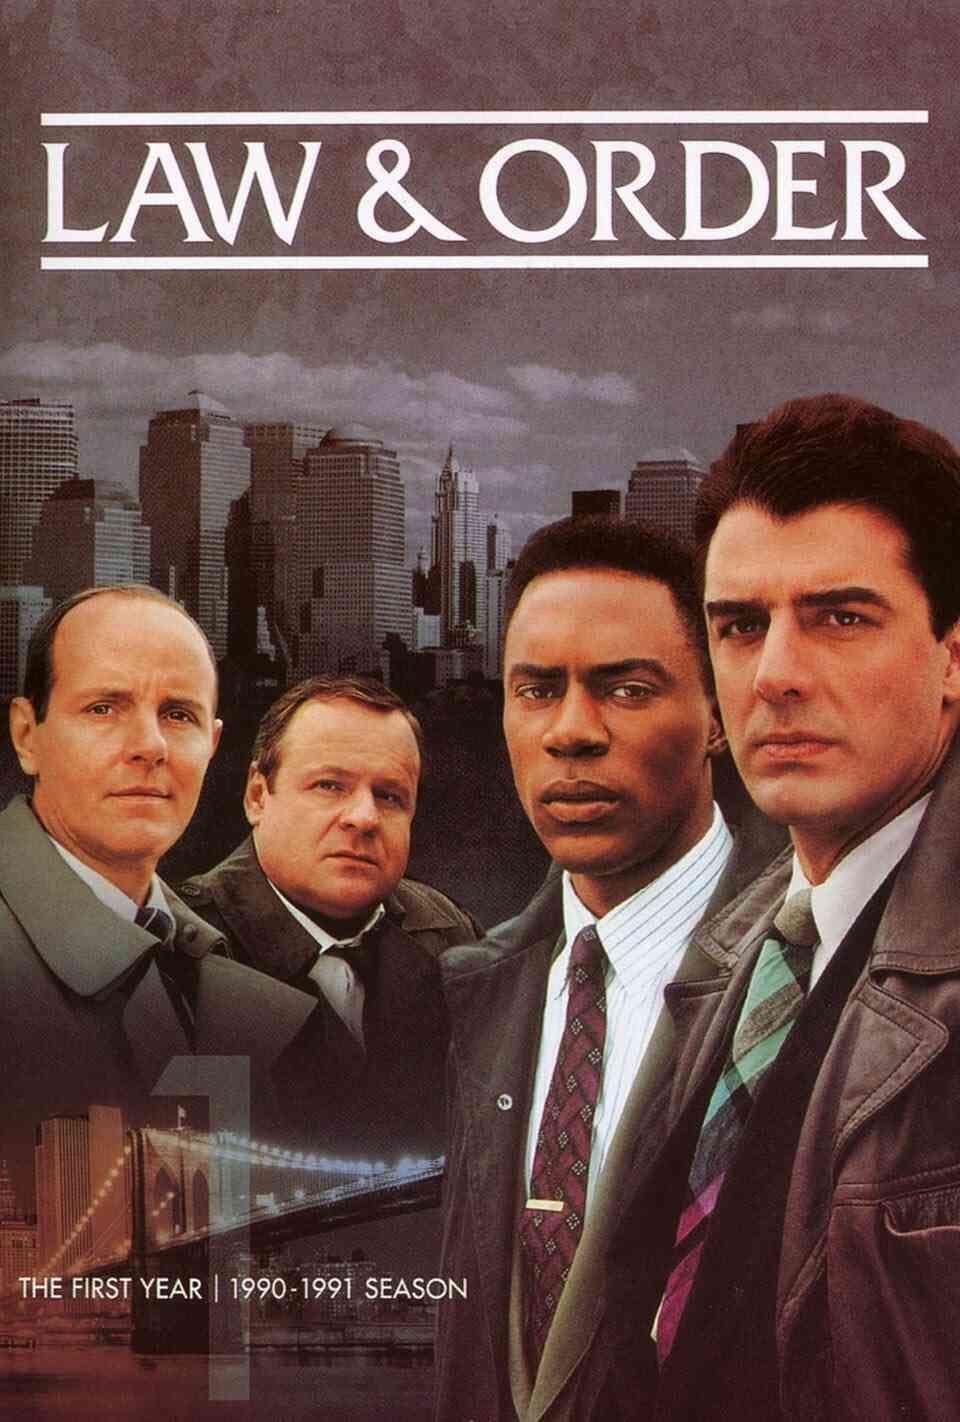 Read Law & Order screenplay (poster)